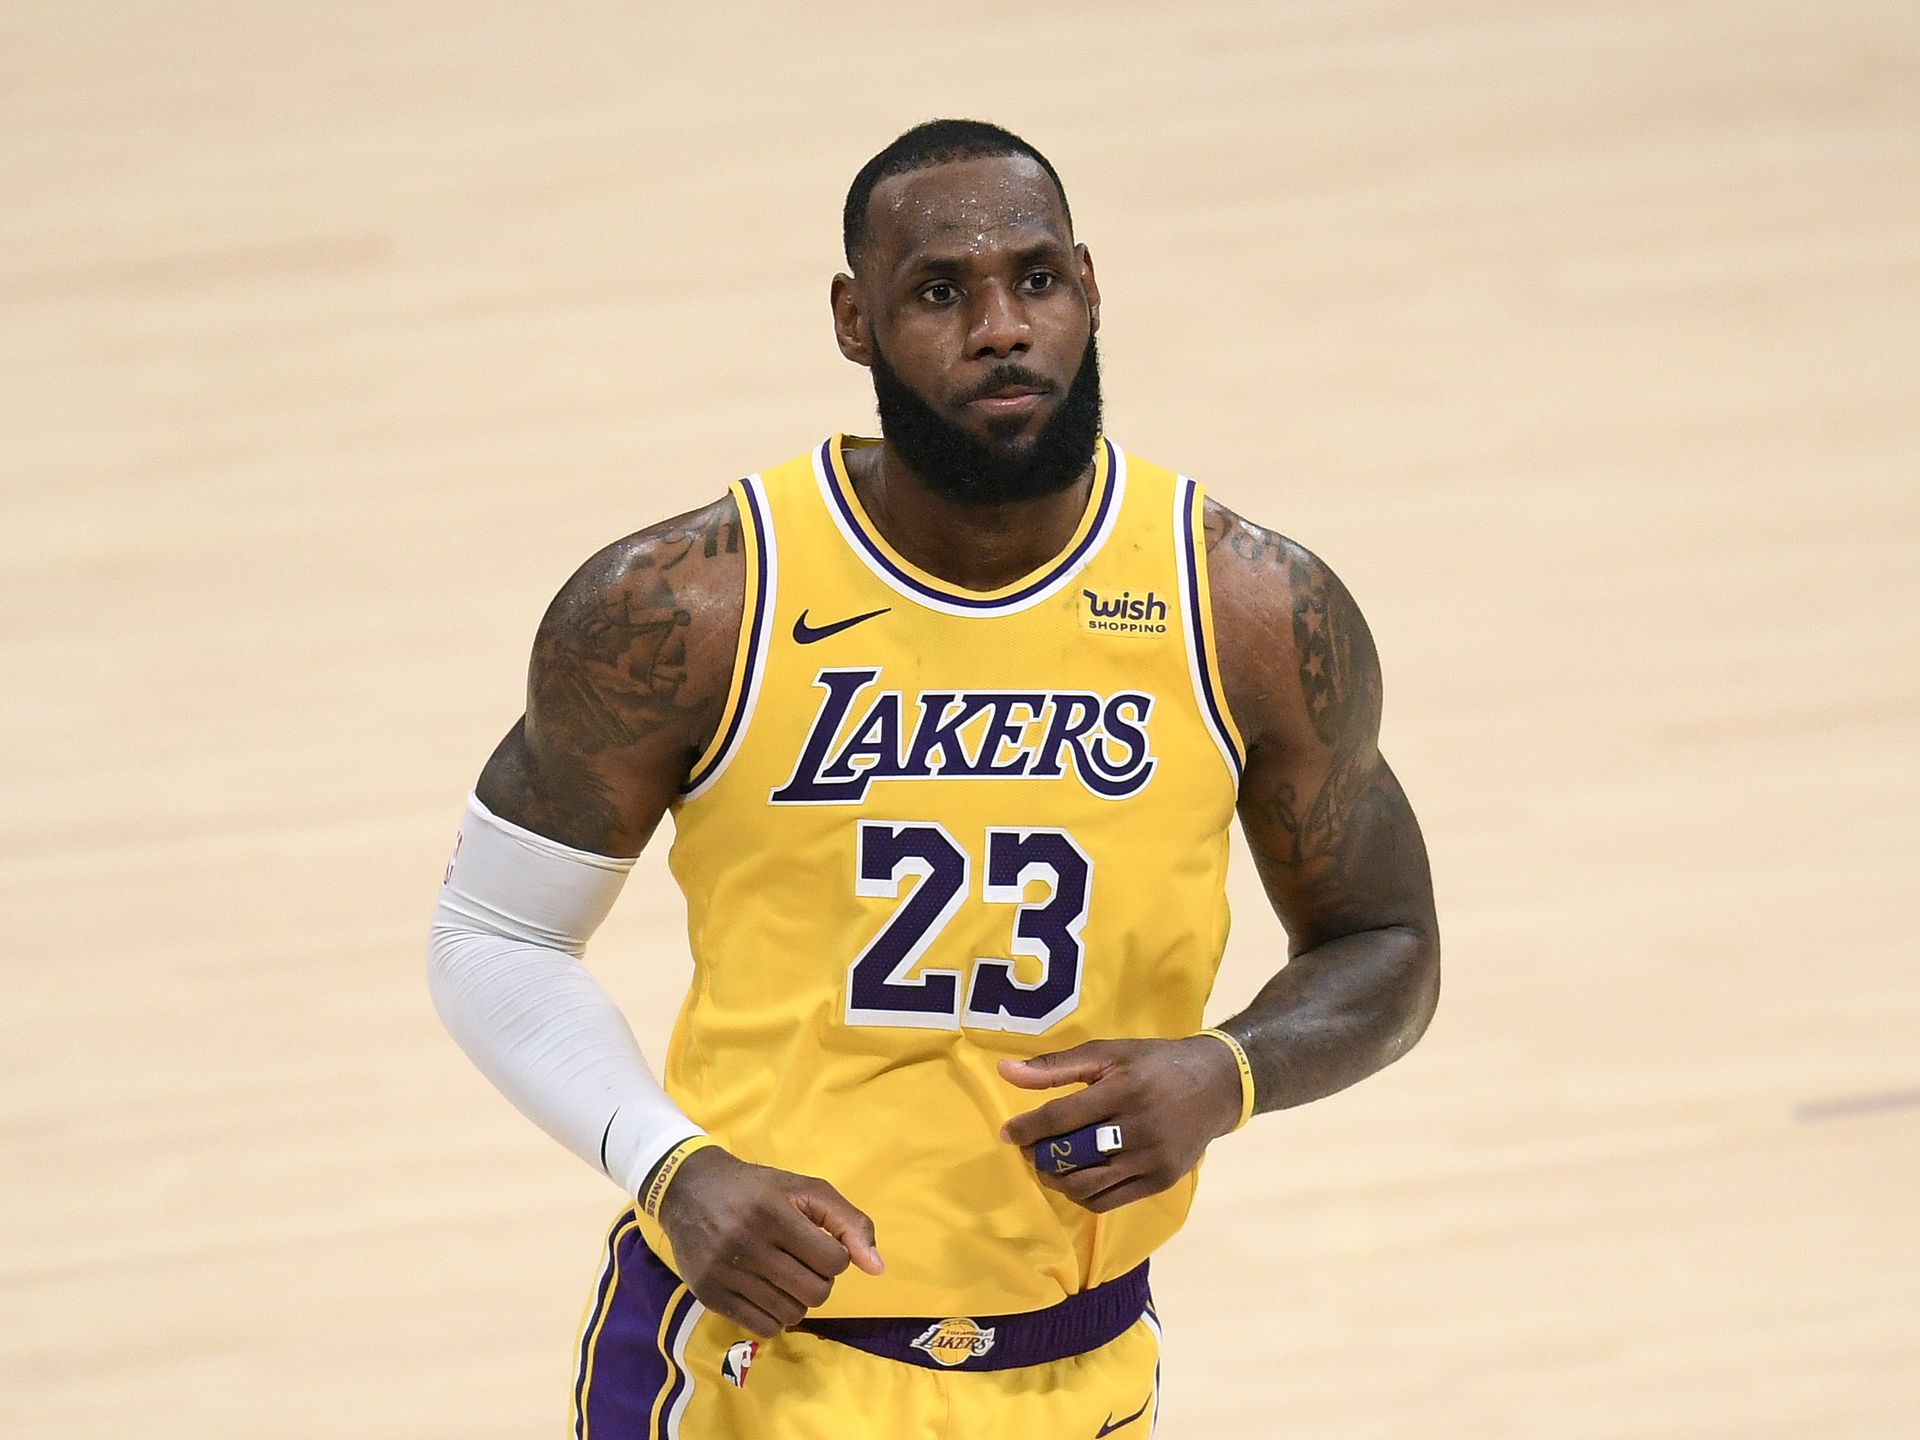 Rumor: LeBron James called in favor with Suns GM to get Tyson